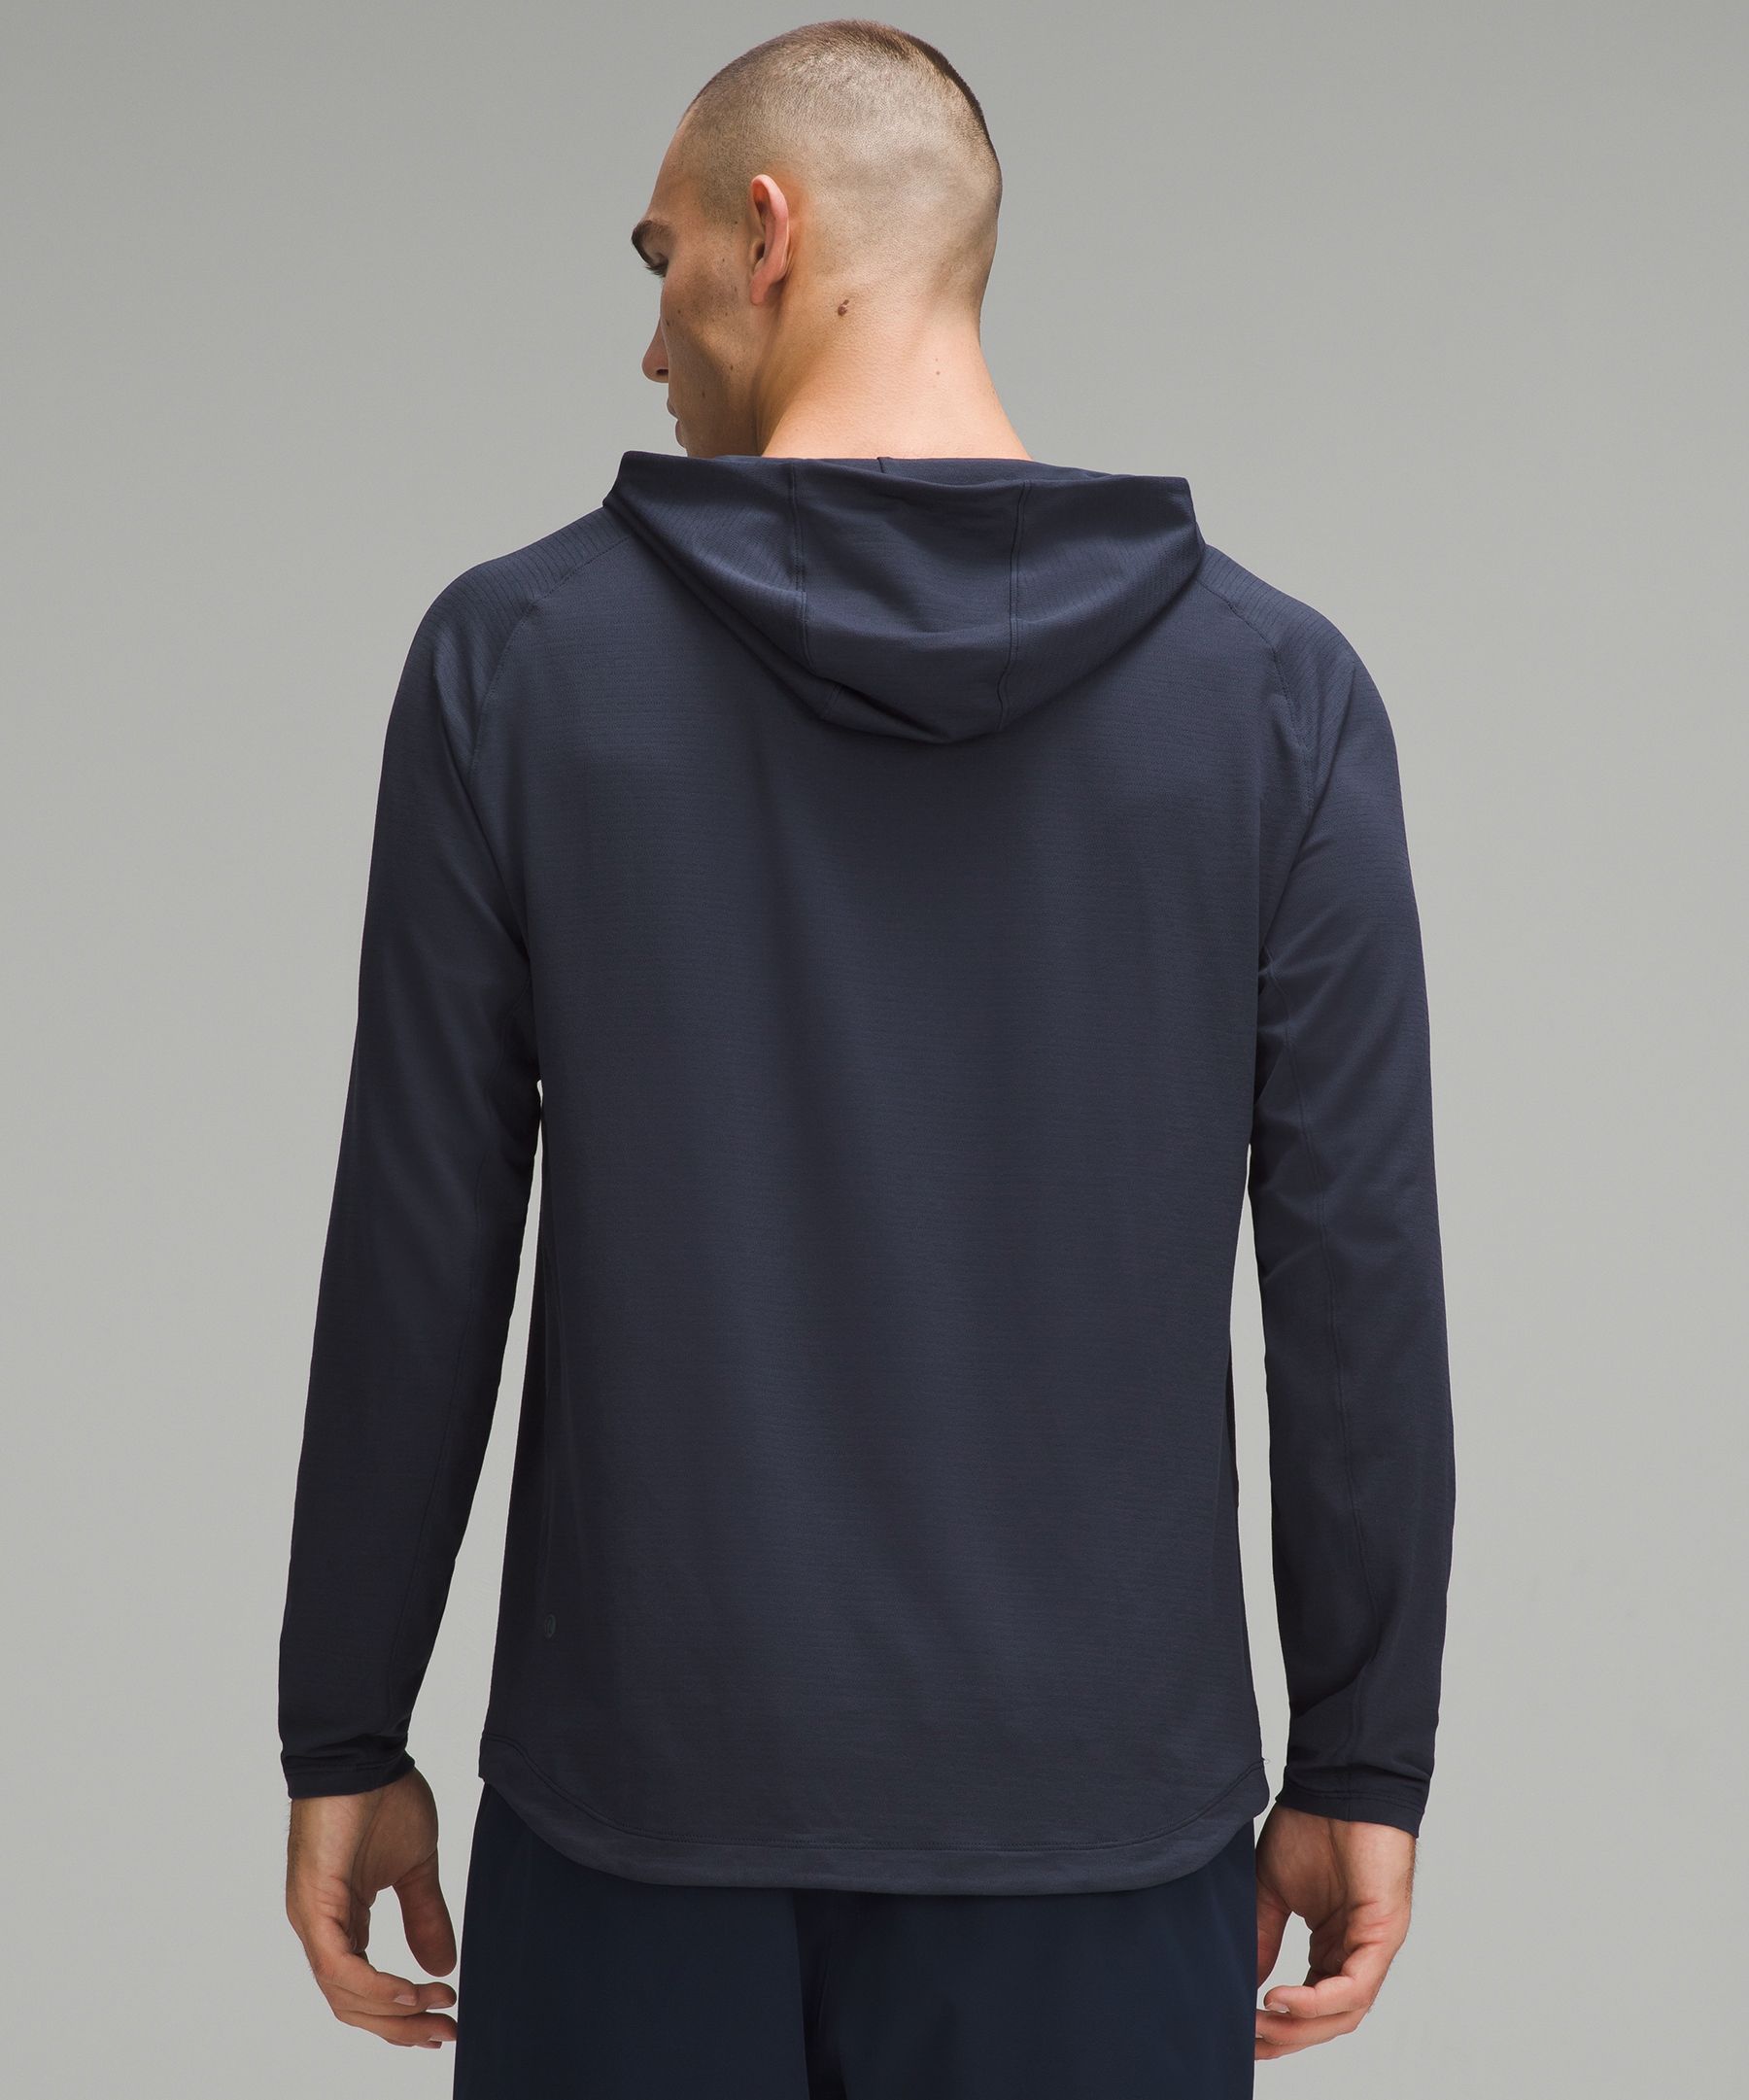 Lululemon License To Train Jersey Hoodie - ShopStyle